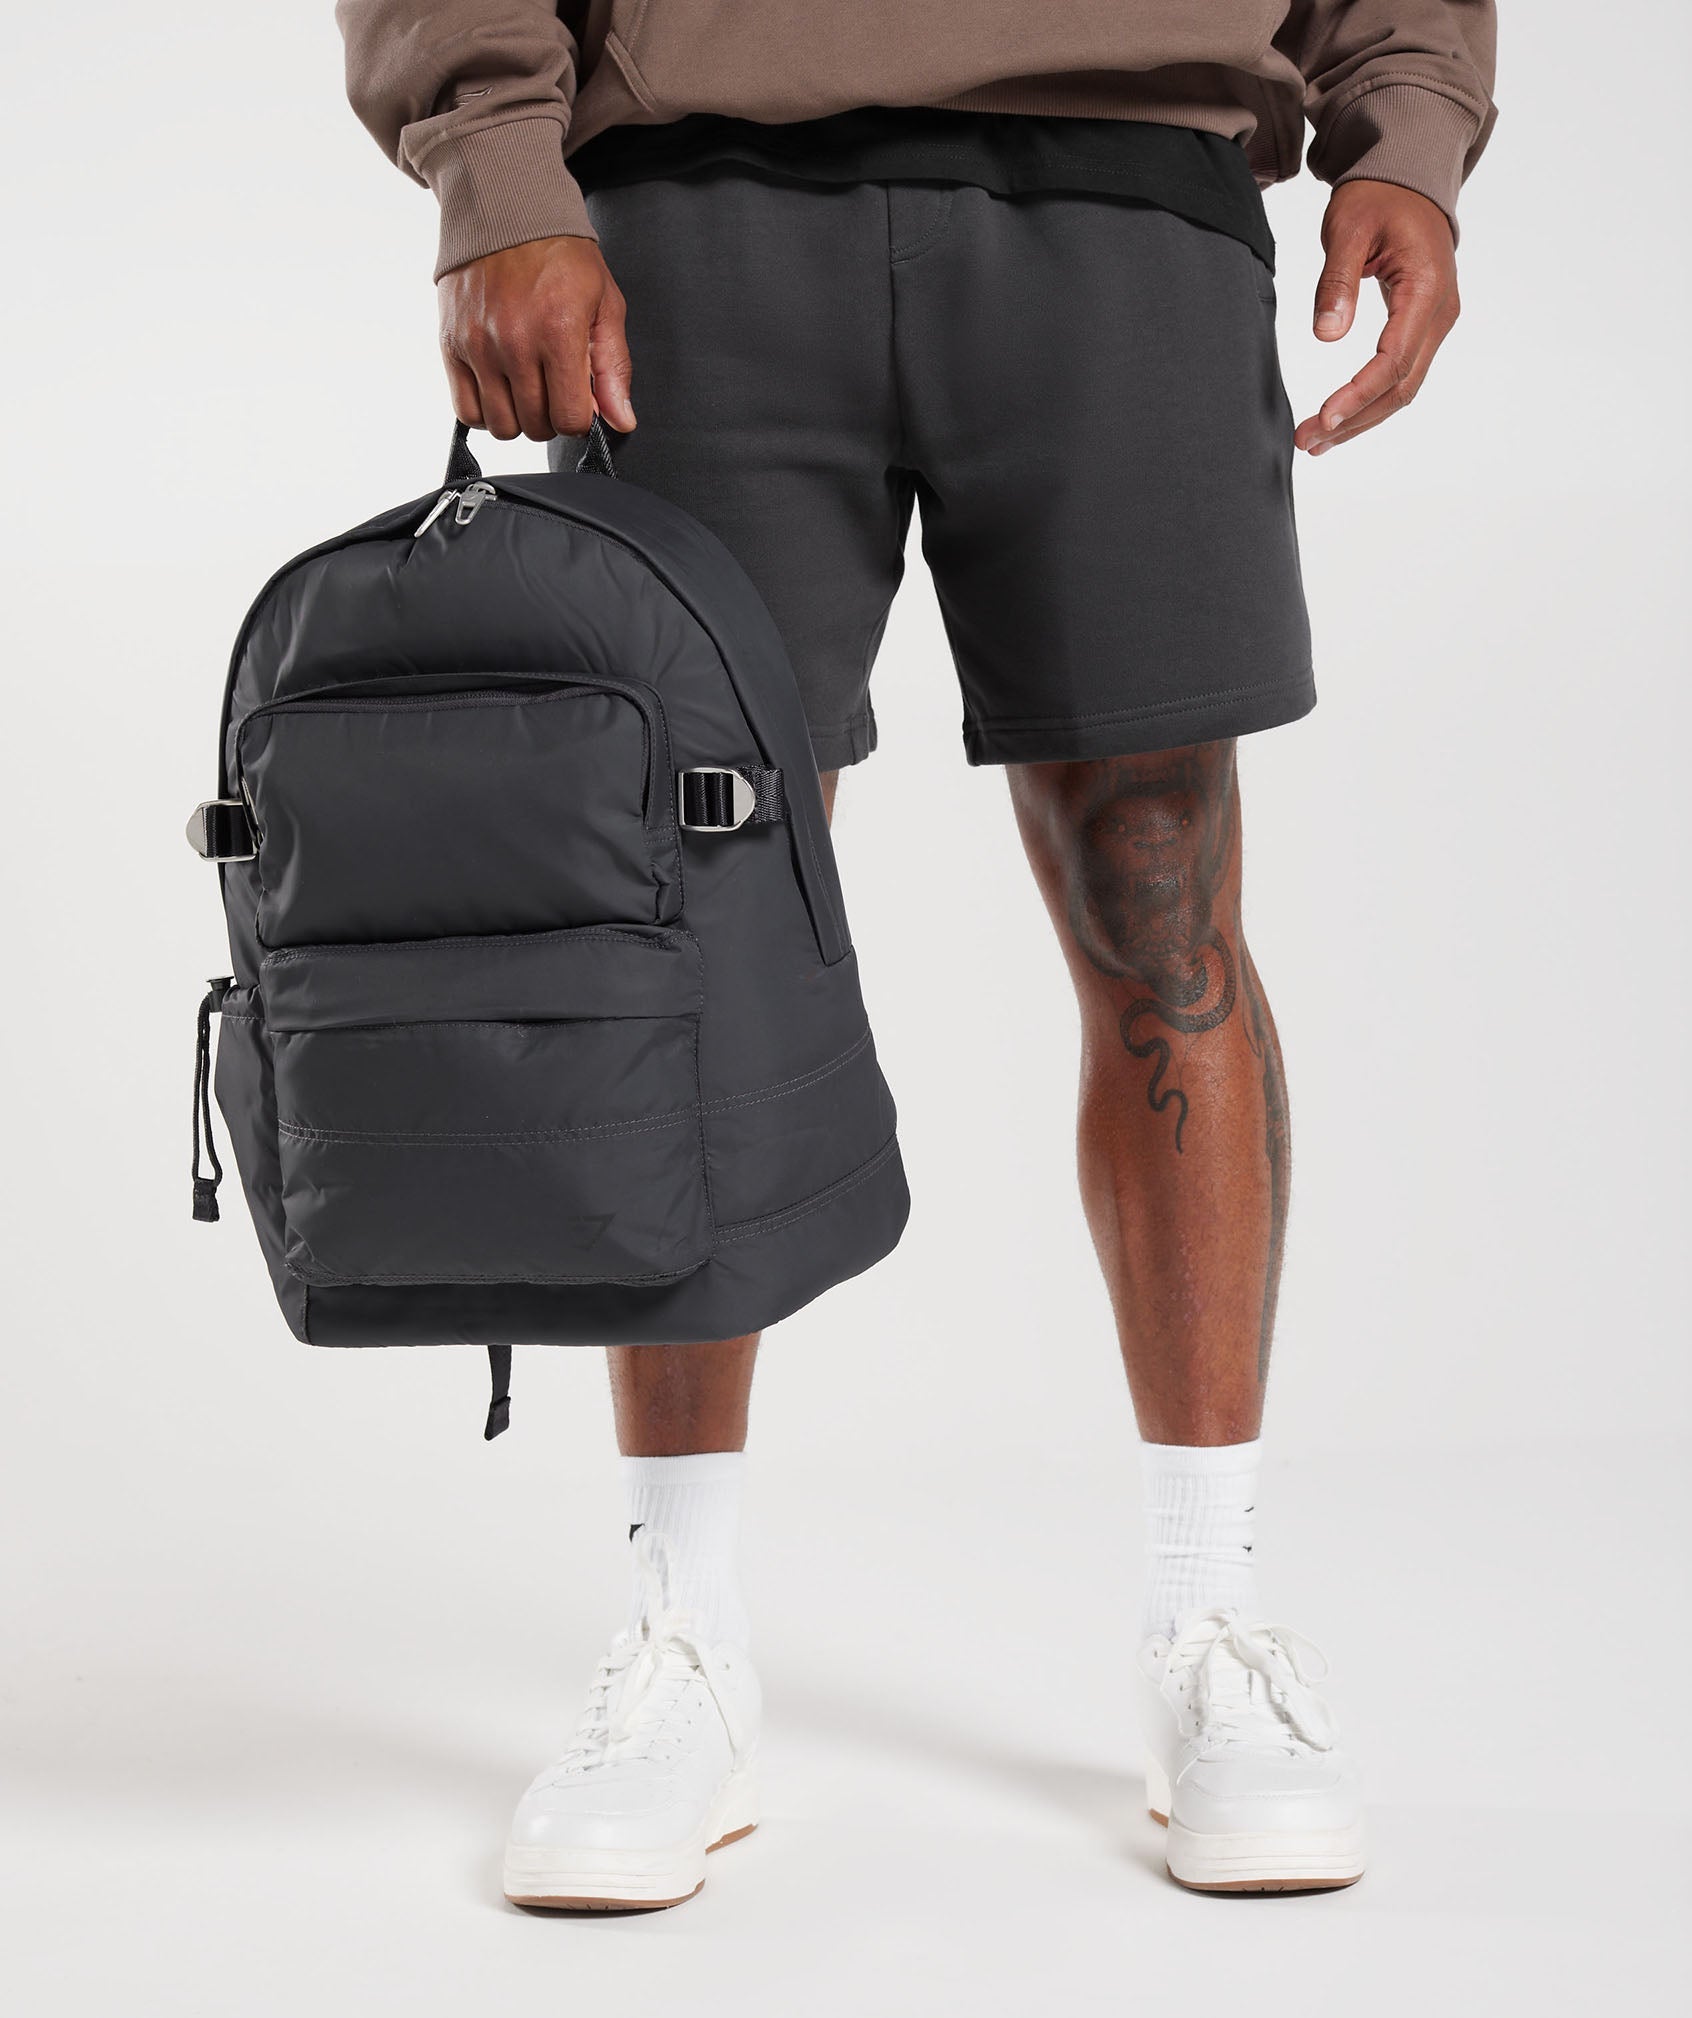 Premium Lifestyle Backpack in Onyx Grey - view 8